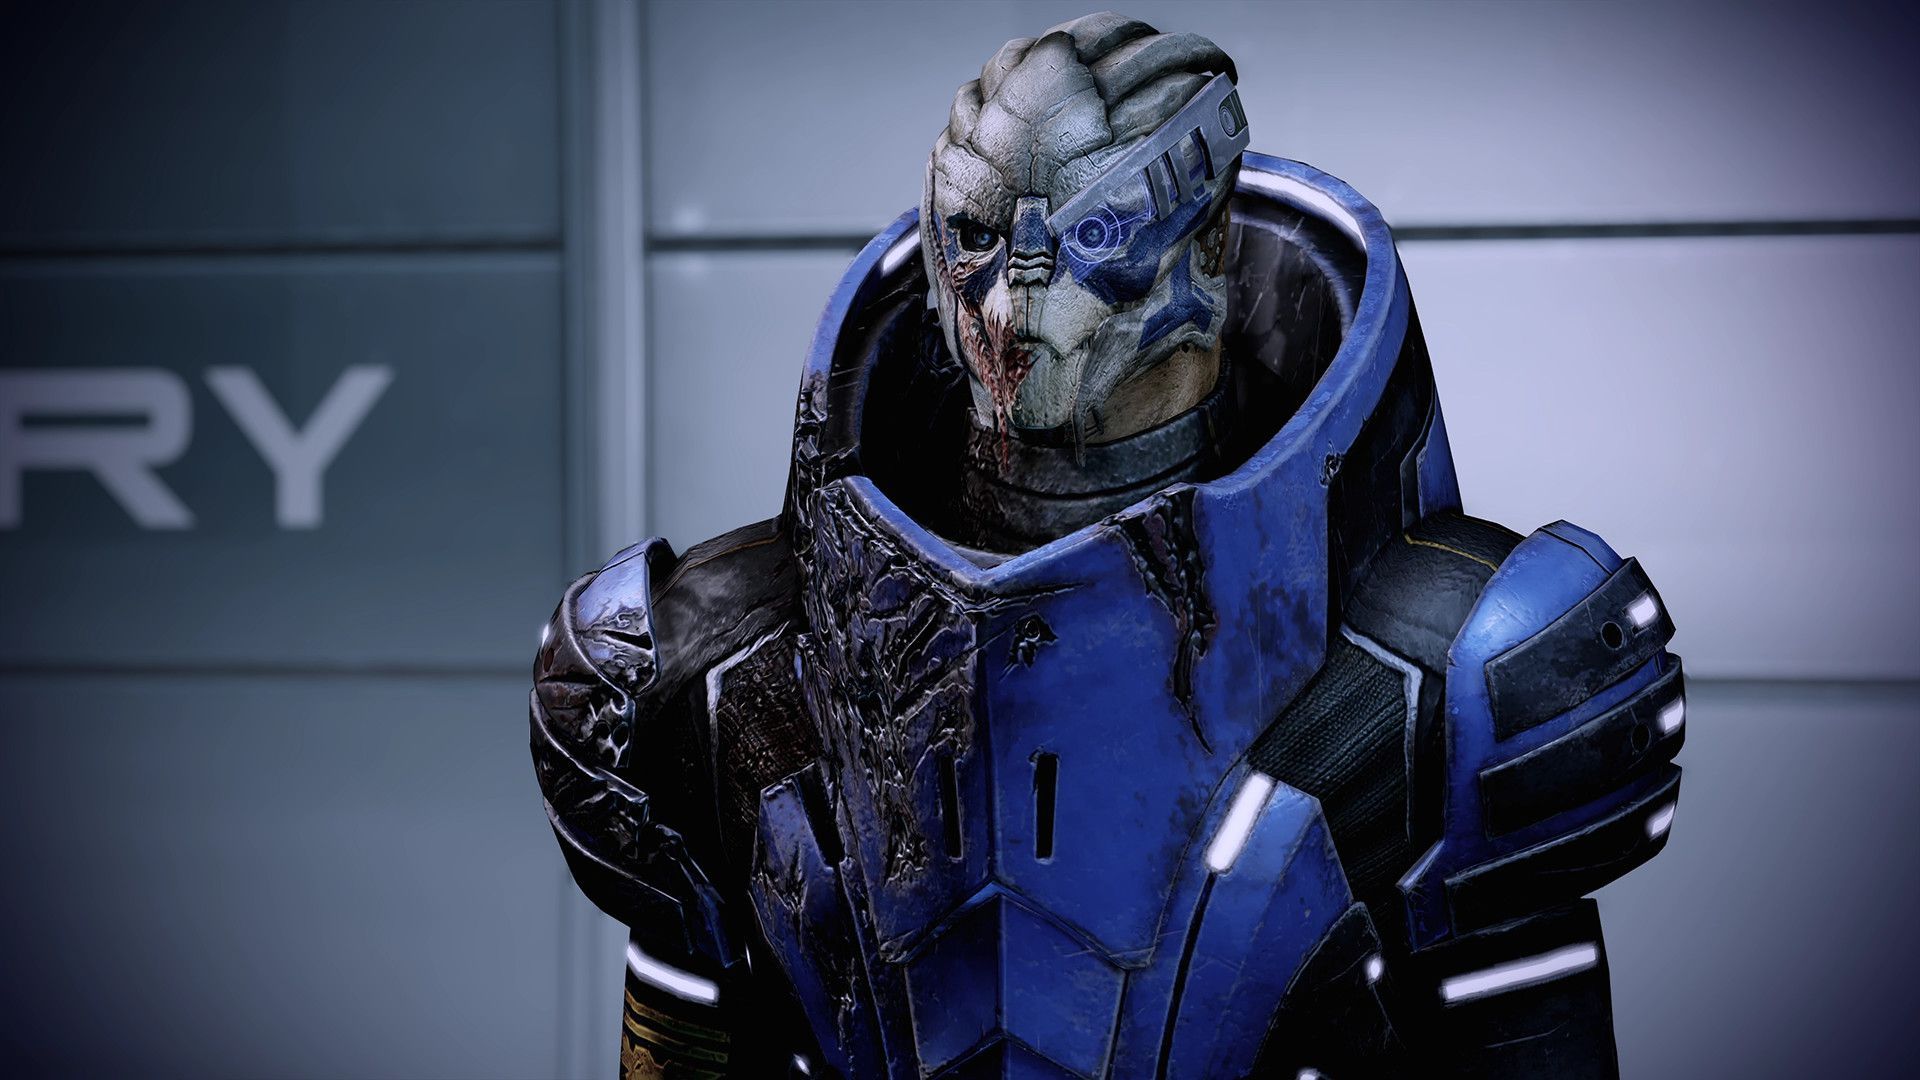 Screengrab of a character from the Mass Effect video game